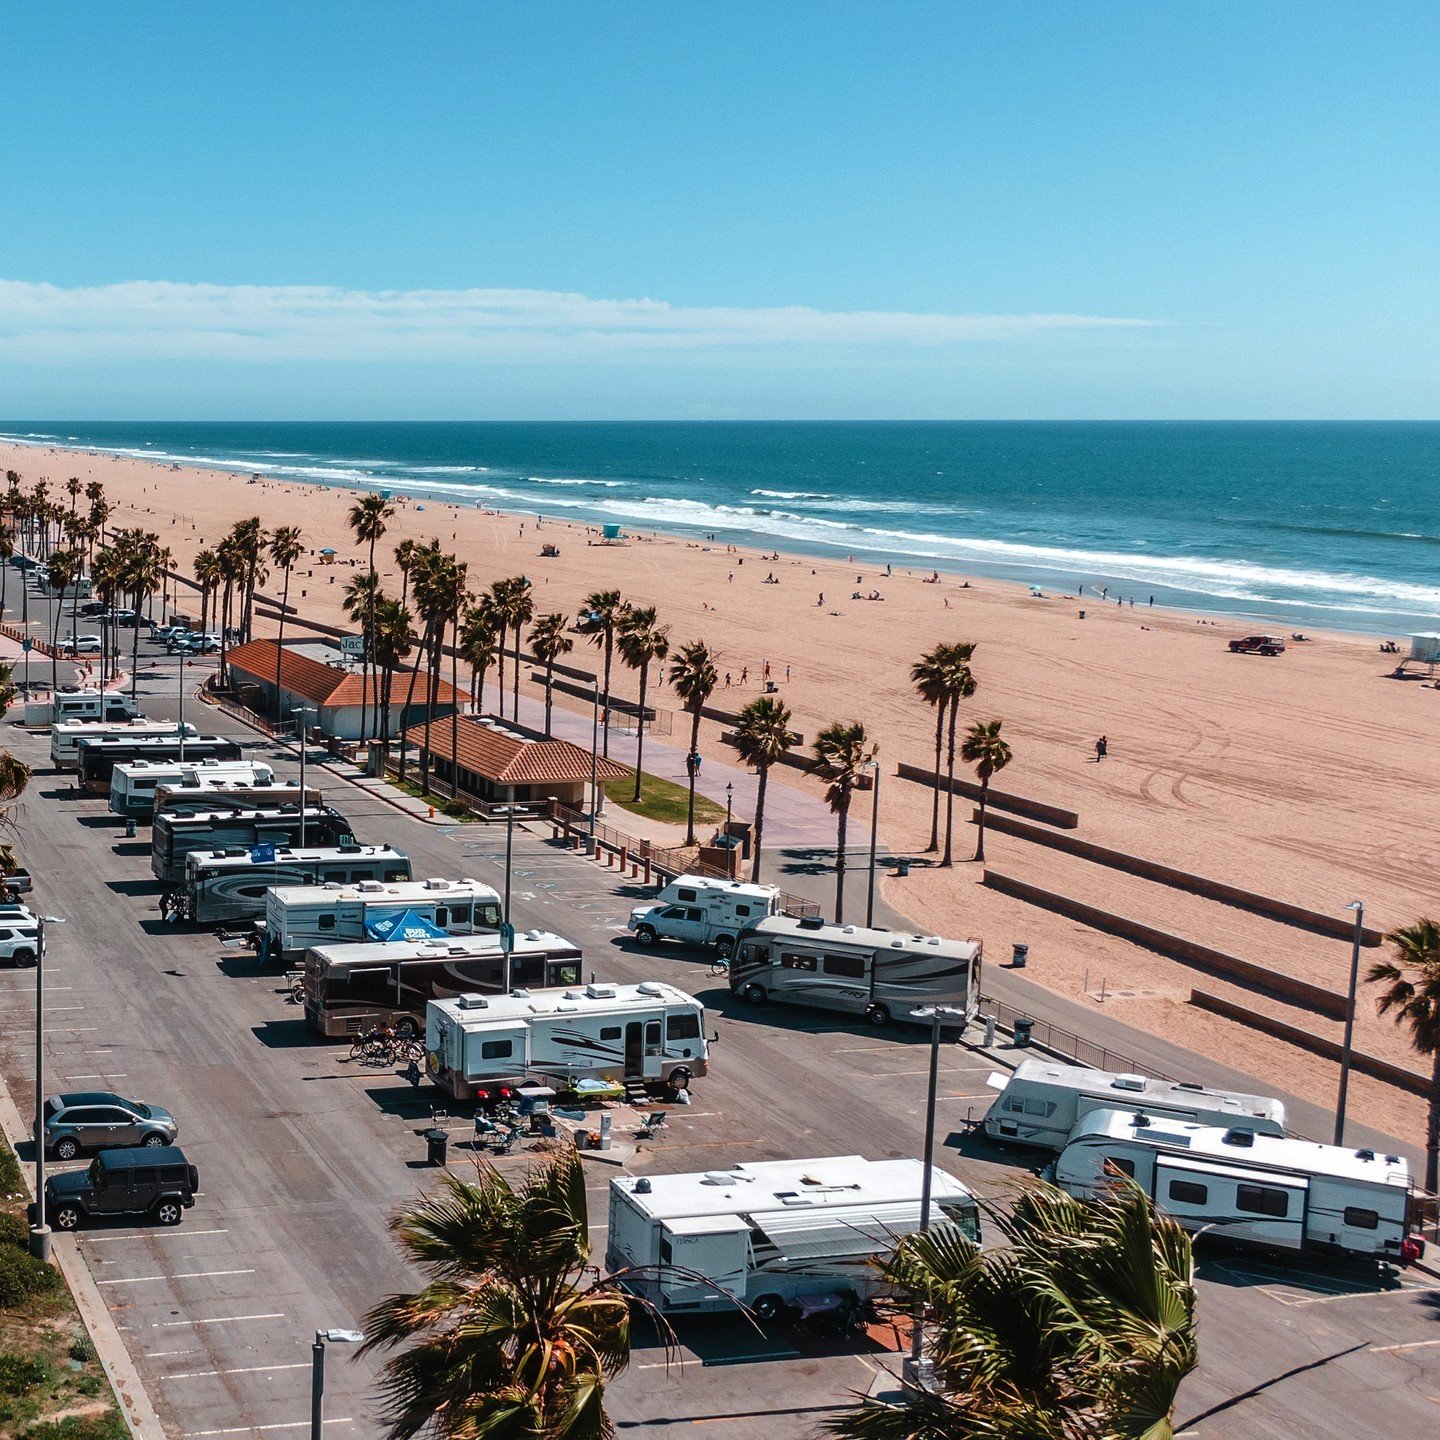 Ready to RV-olutionize your airshow experience!? 🚐

Experience the thrill up close and personal from your premium ocean-front RV camping spot in Huntington Beach! ☀️

Spaces are limited so book today before it&rsquo;s too late! 🎟️

For more info, h